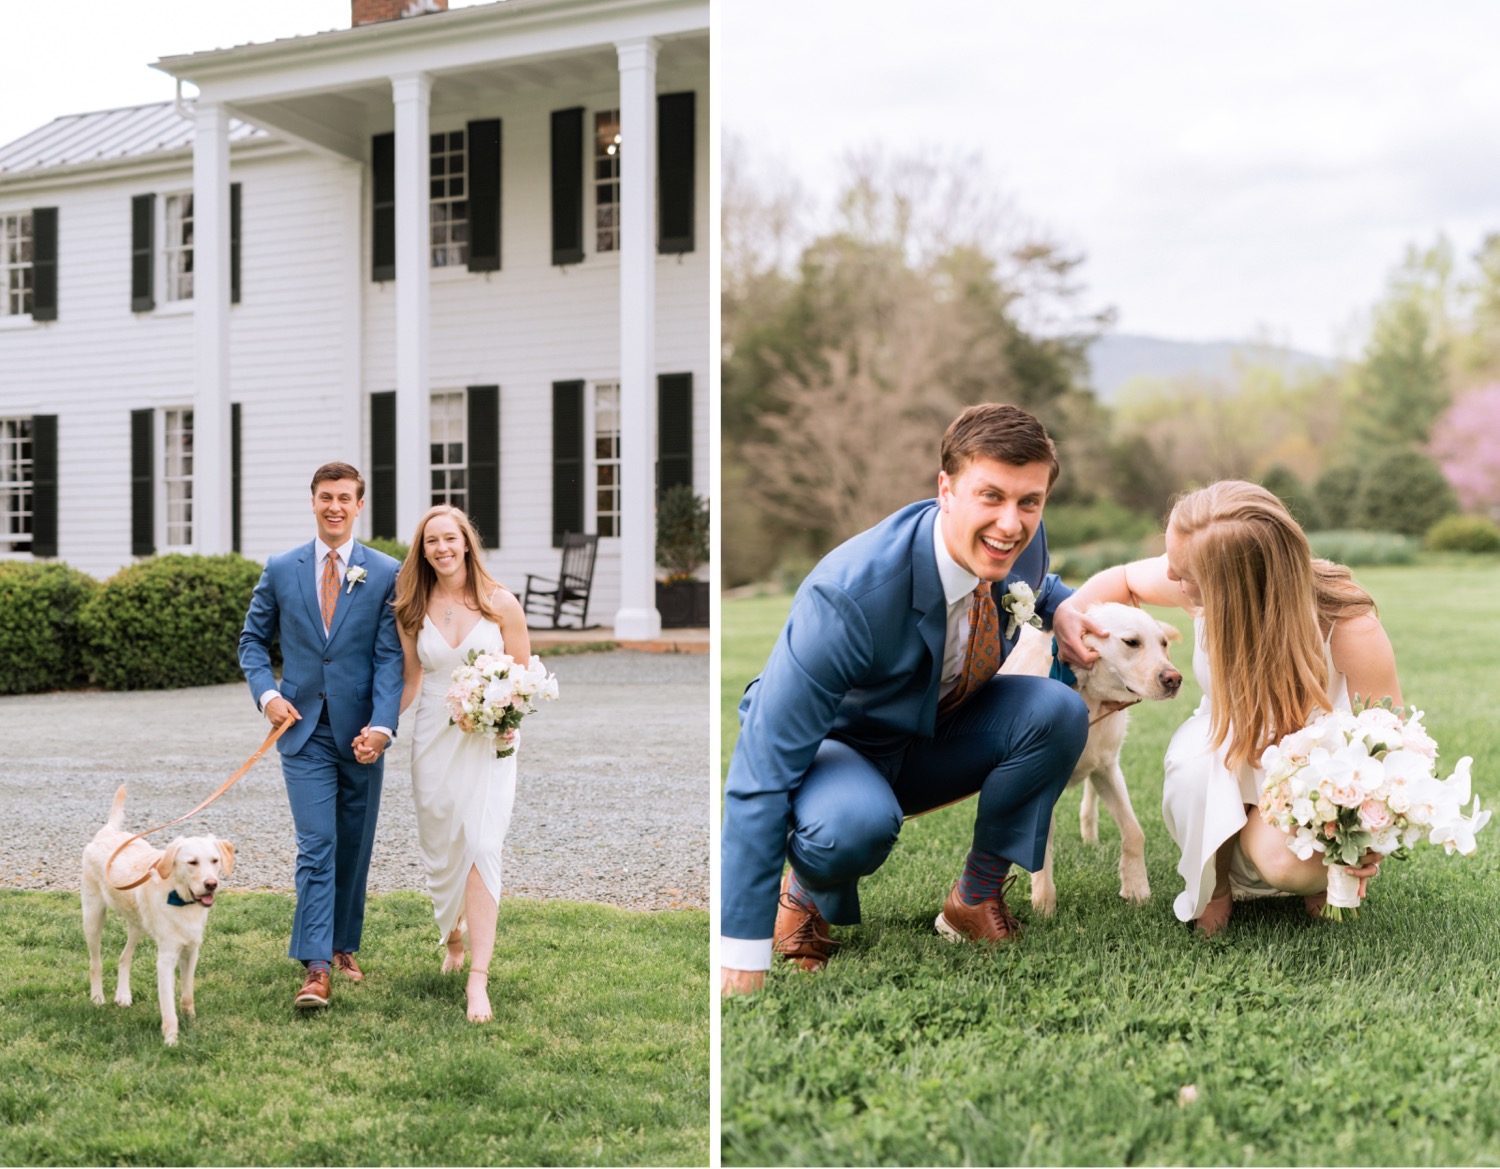 bride and groom celebrate their wedding day with the family dog